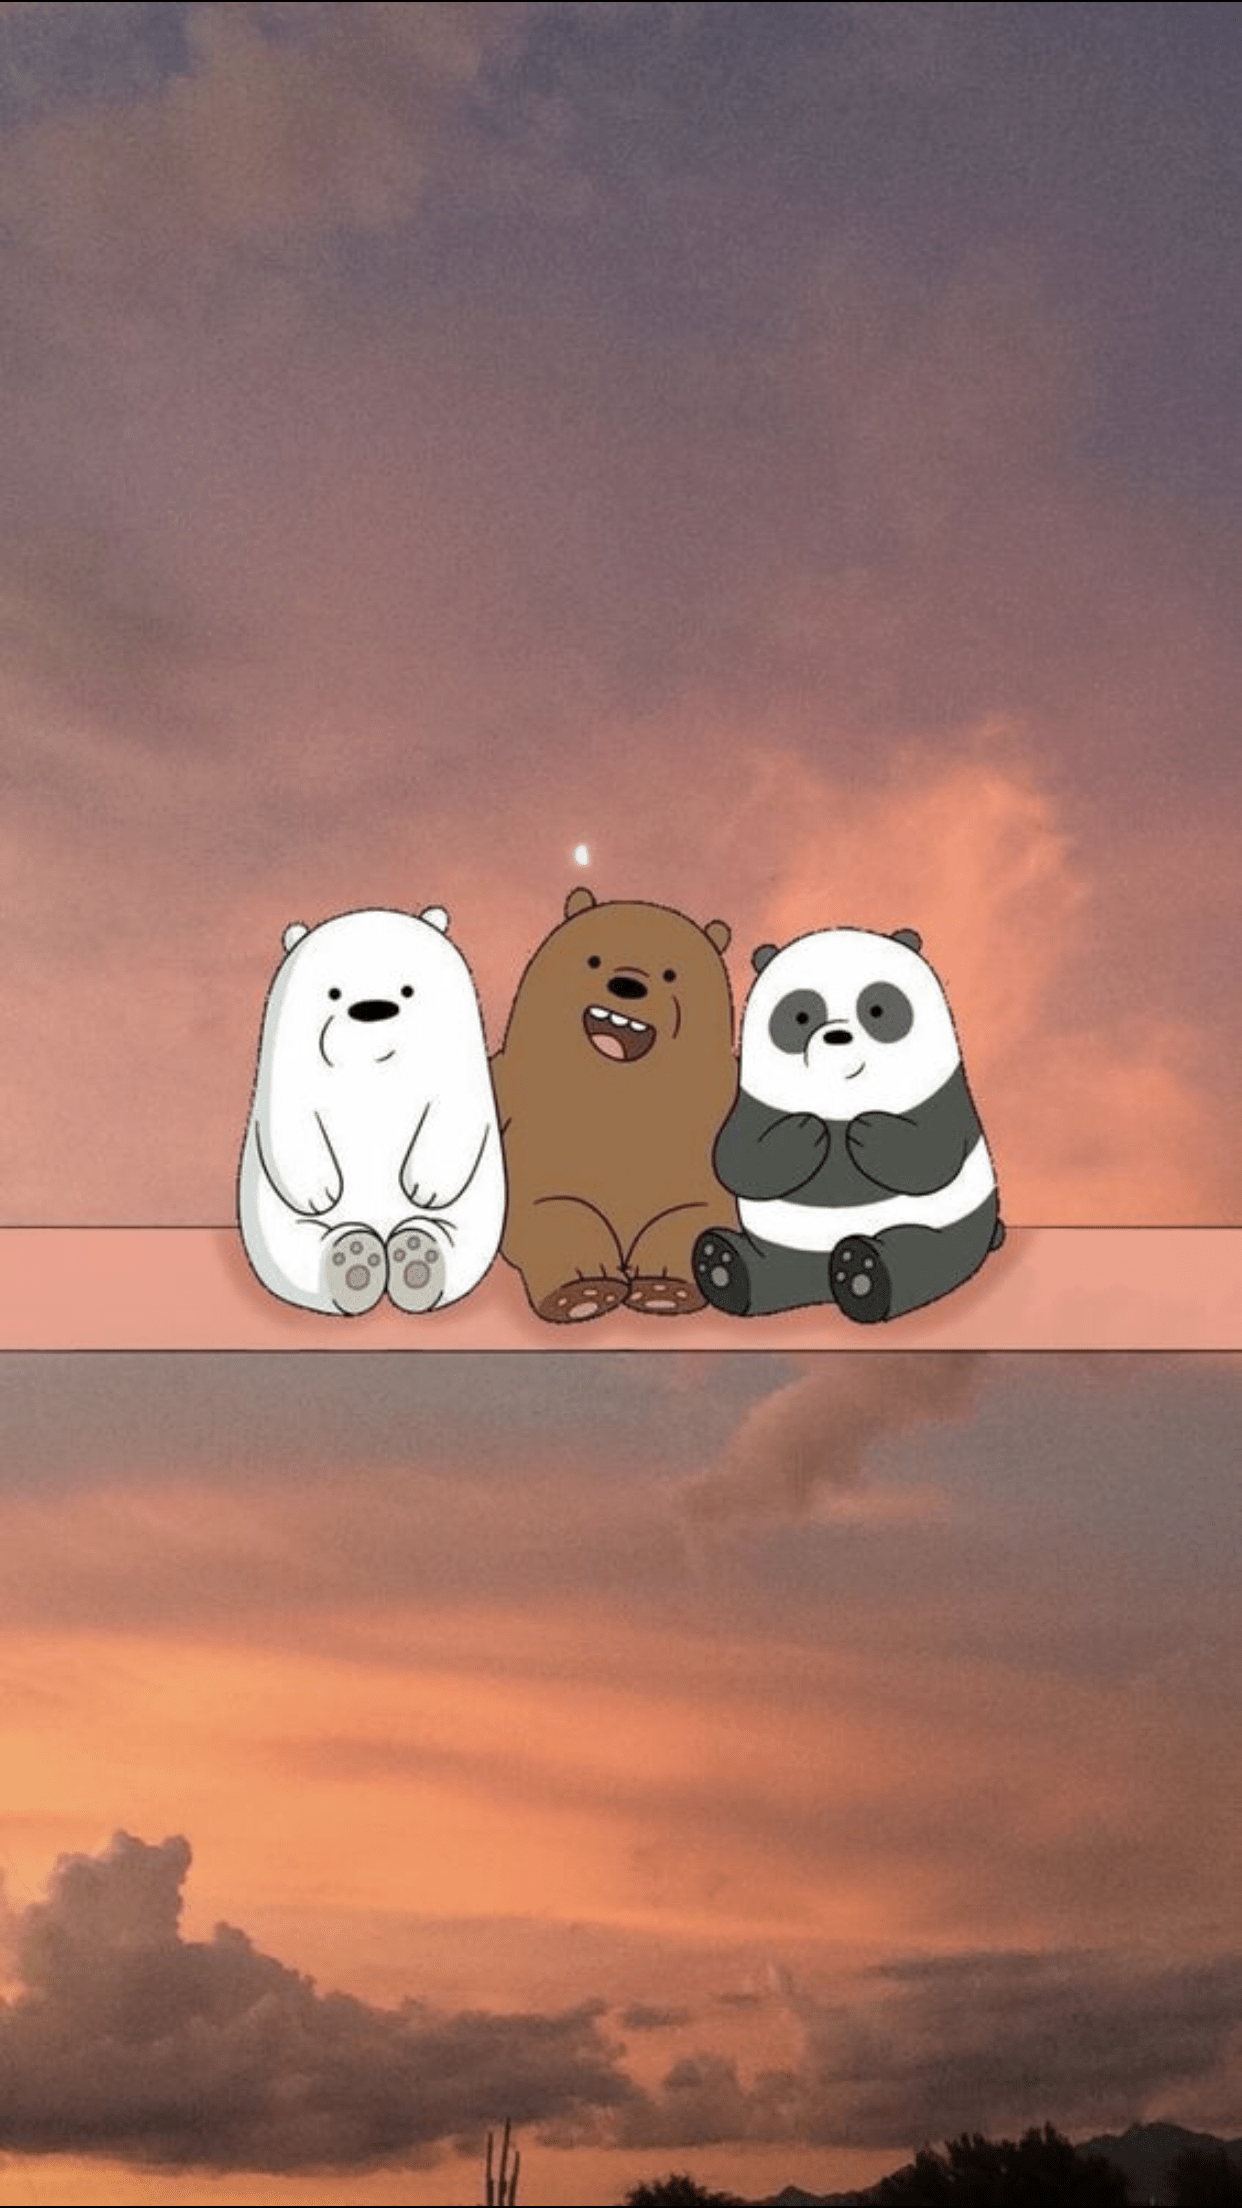 A picture of three bears sitting on the edge - We Bare Bears